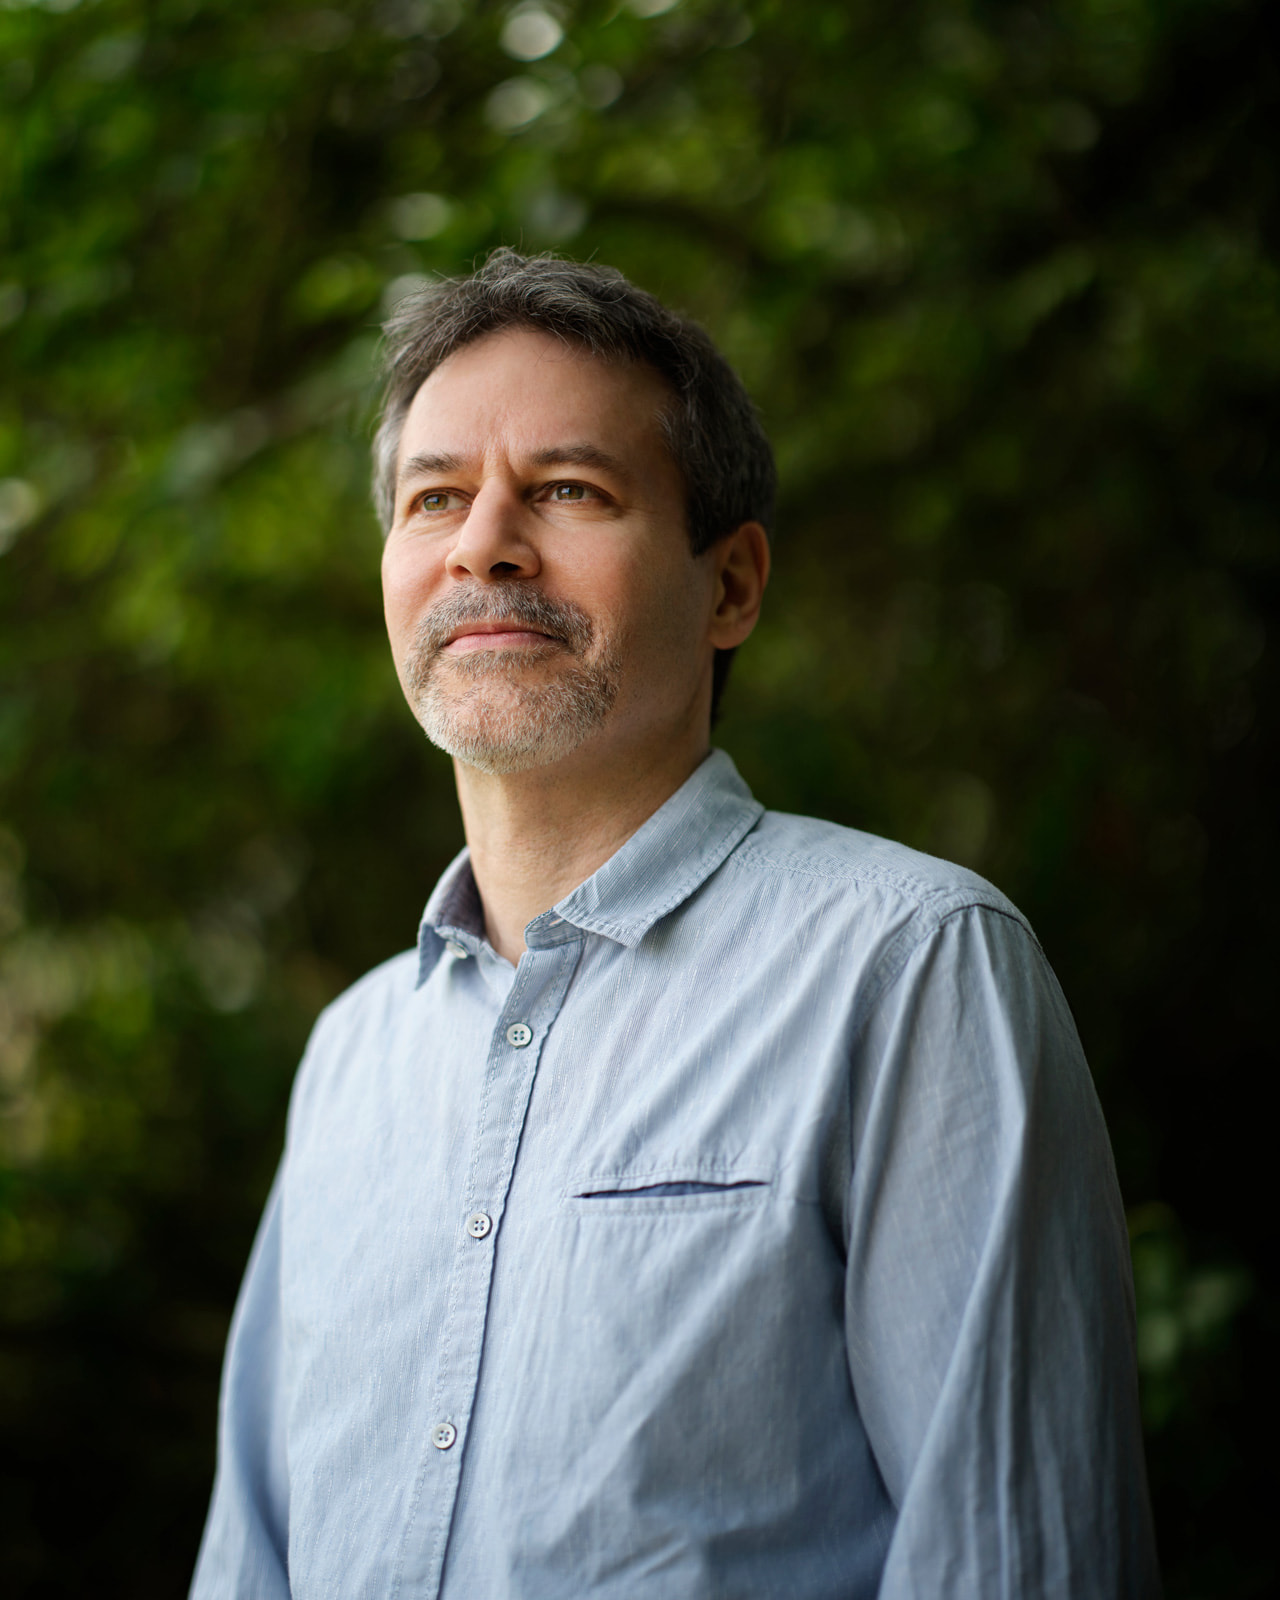 A portrait of AssistiveWare founder and CEO David Niemeijer.